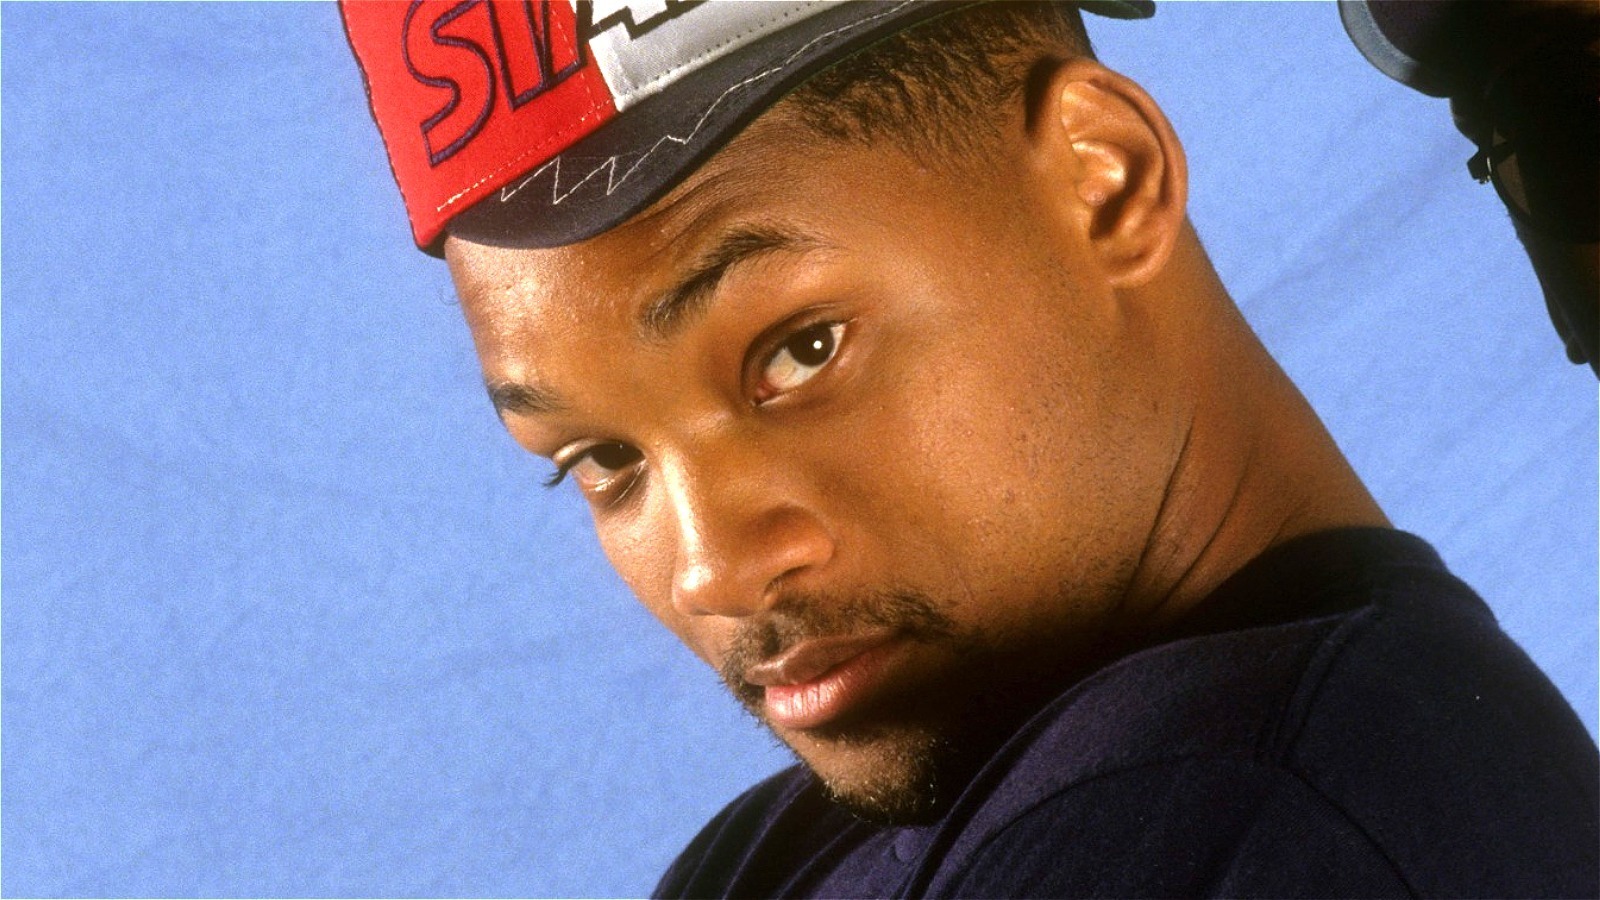 Will Smith's 90's Fashion - Take Cues From Him For Your 90's